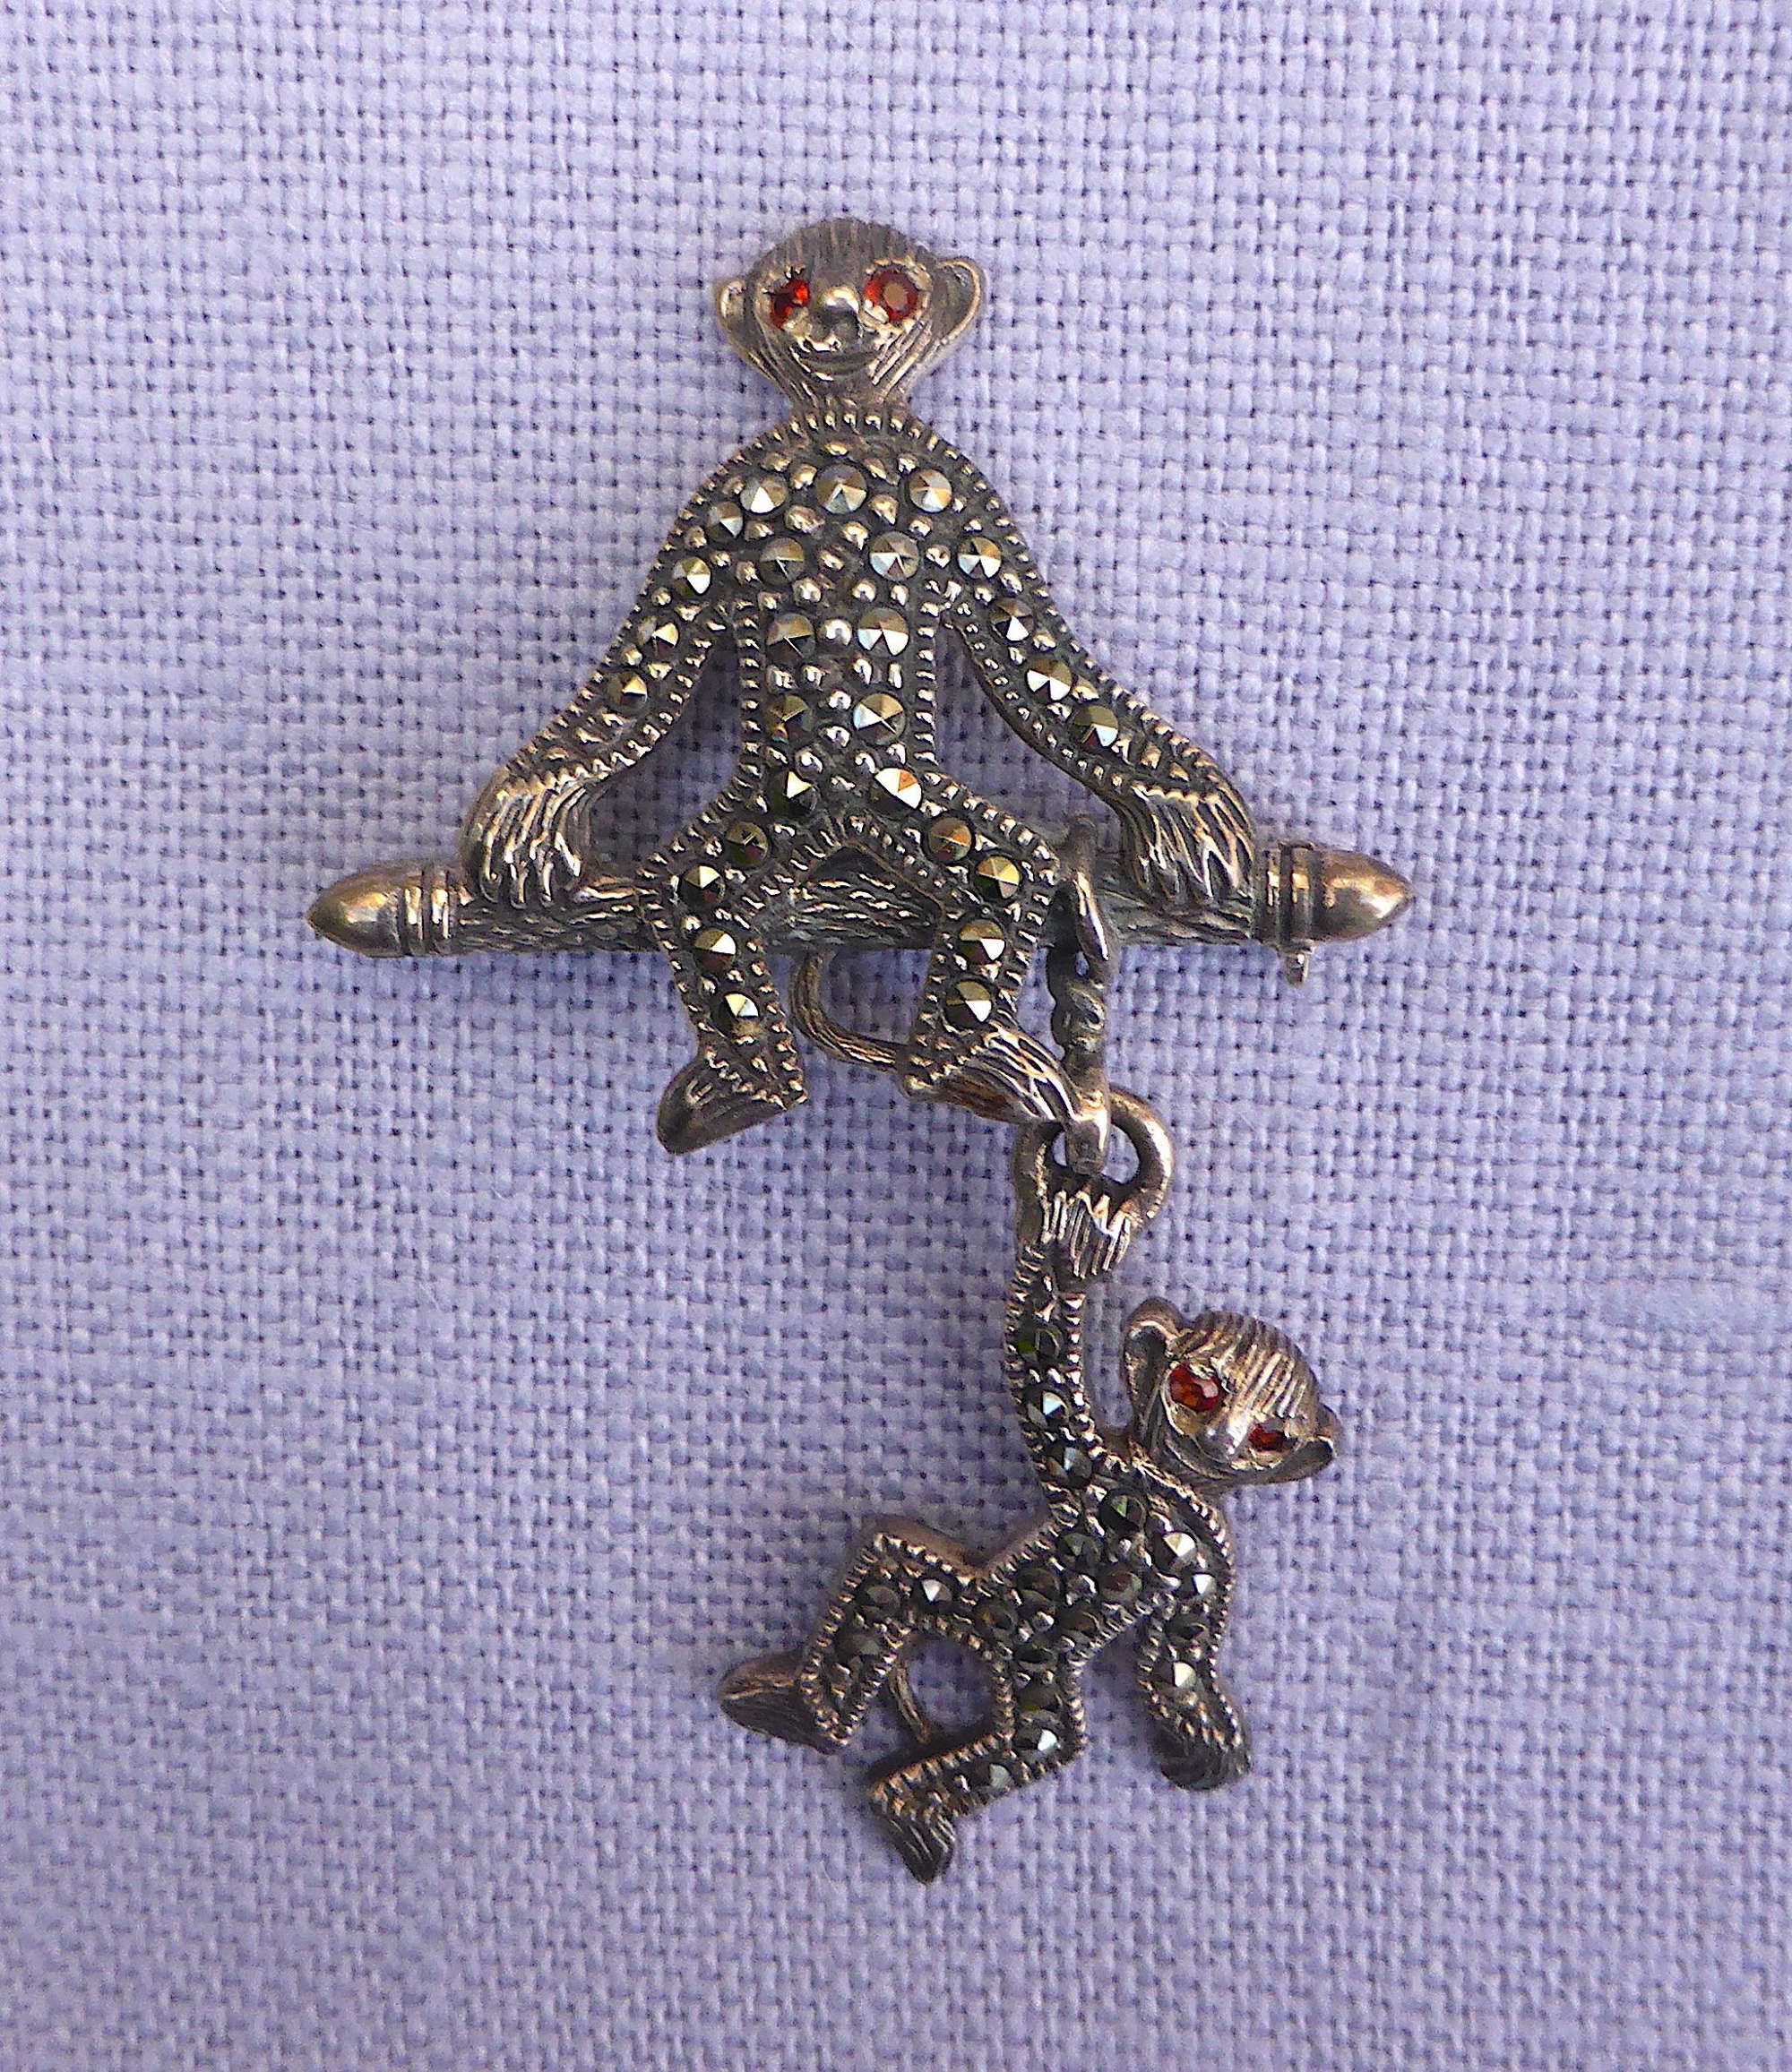 Silver & Marcasite Articulated Monkey Brooch